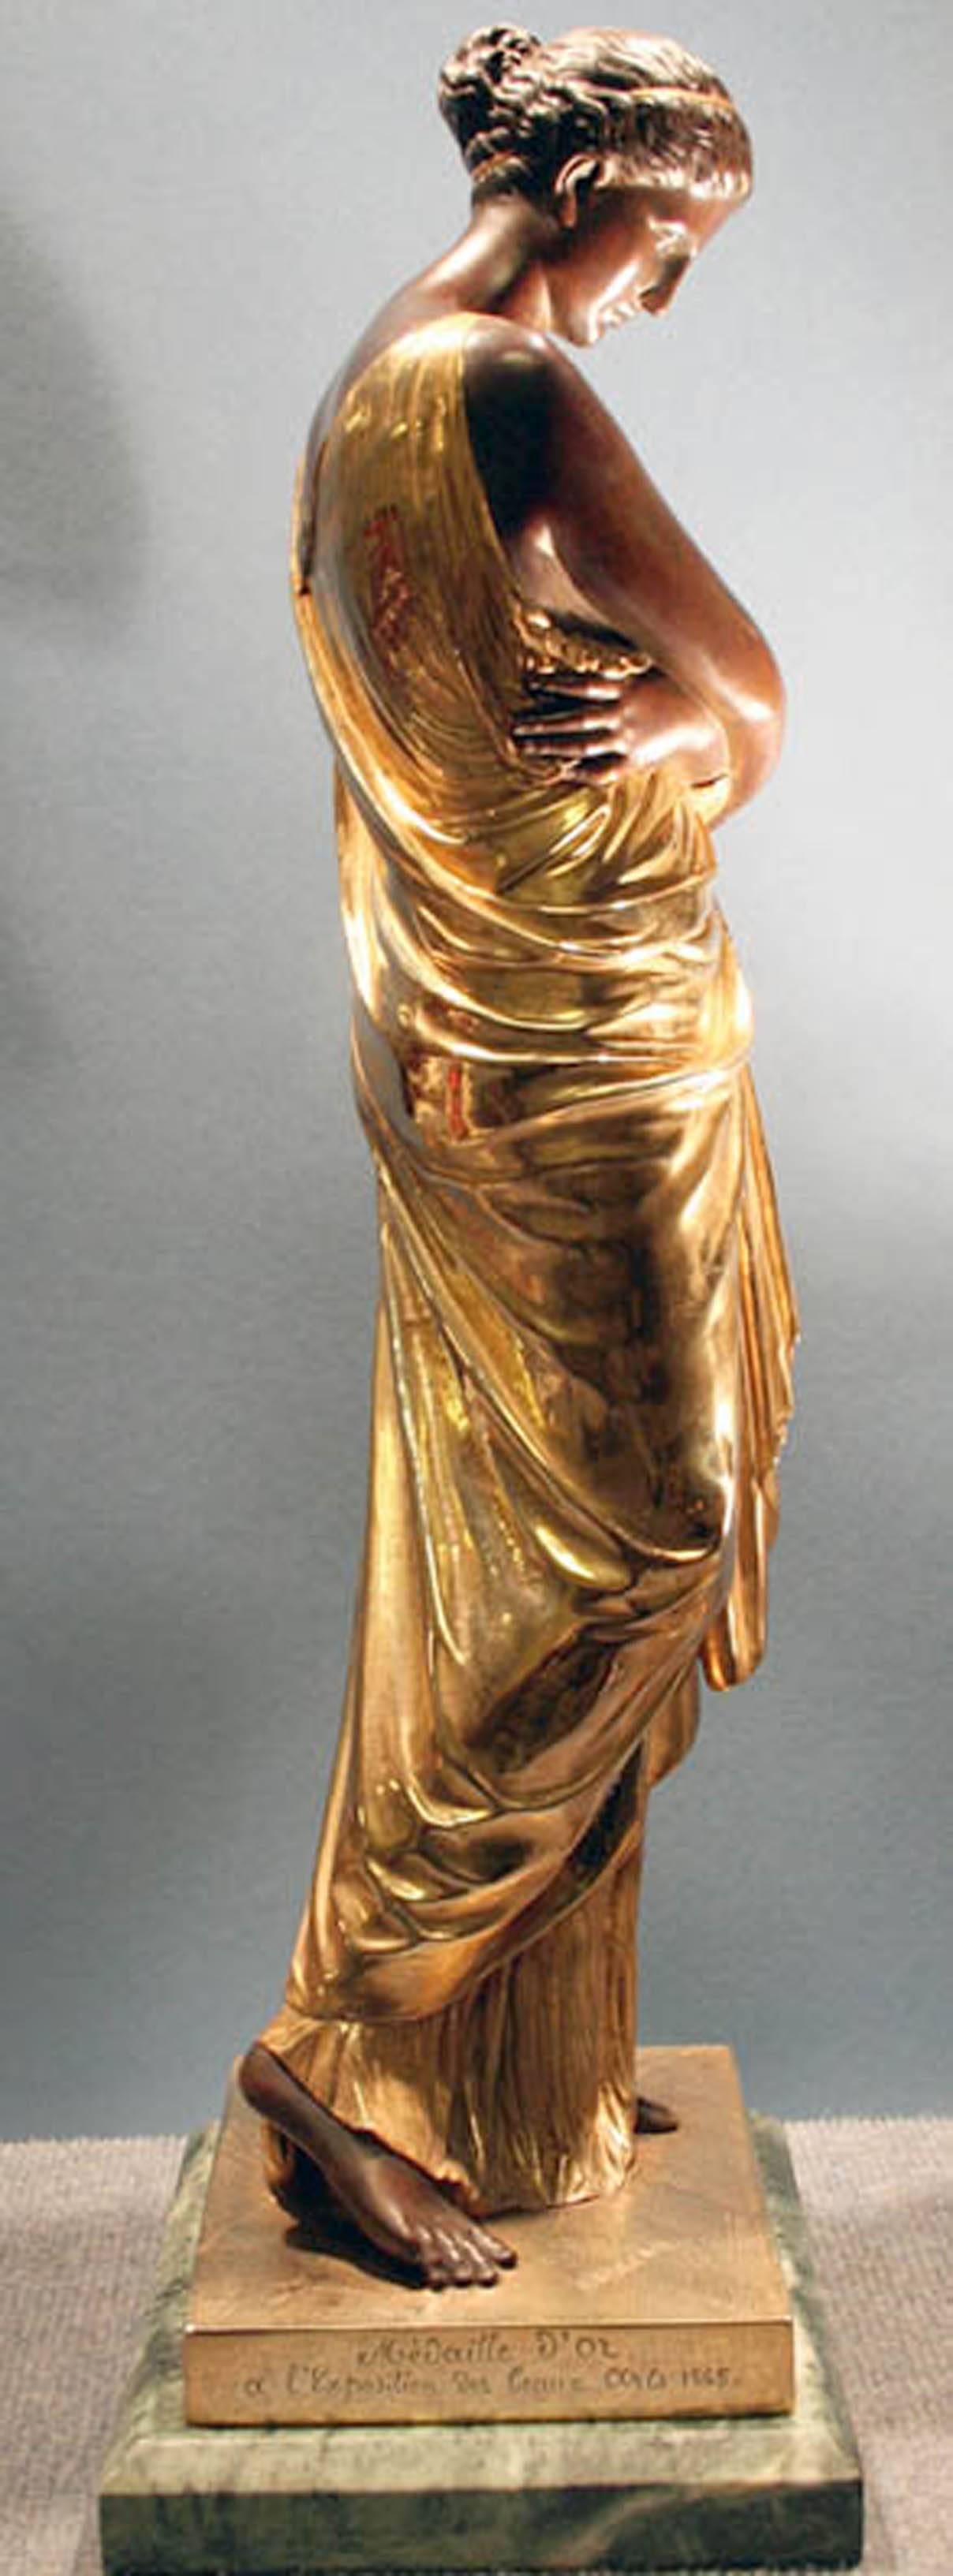 Auguste Marie Barreau (French, d.1922)

Young woman in Grecian dress.

A gilt and patinated bronze statue, signed on the base and inscribed “Médaille d’Or à l’Exposition des Beaux Arts 1865” and “Acheté par l’État”. 

Height: 24.5”